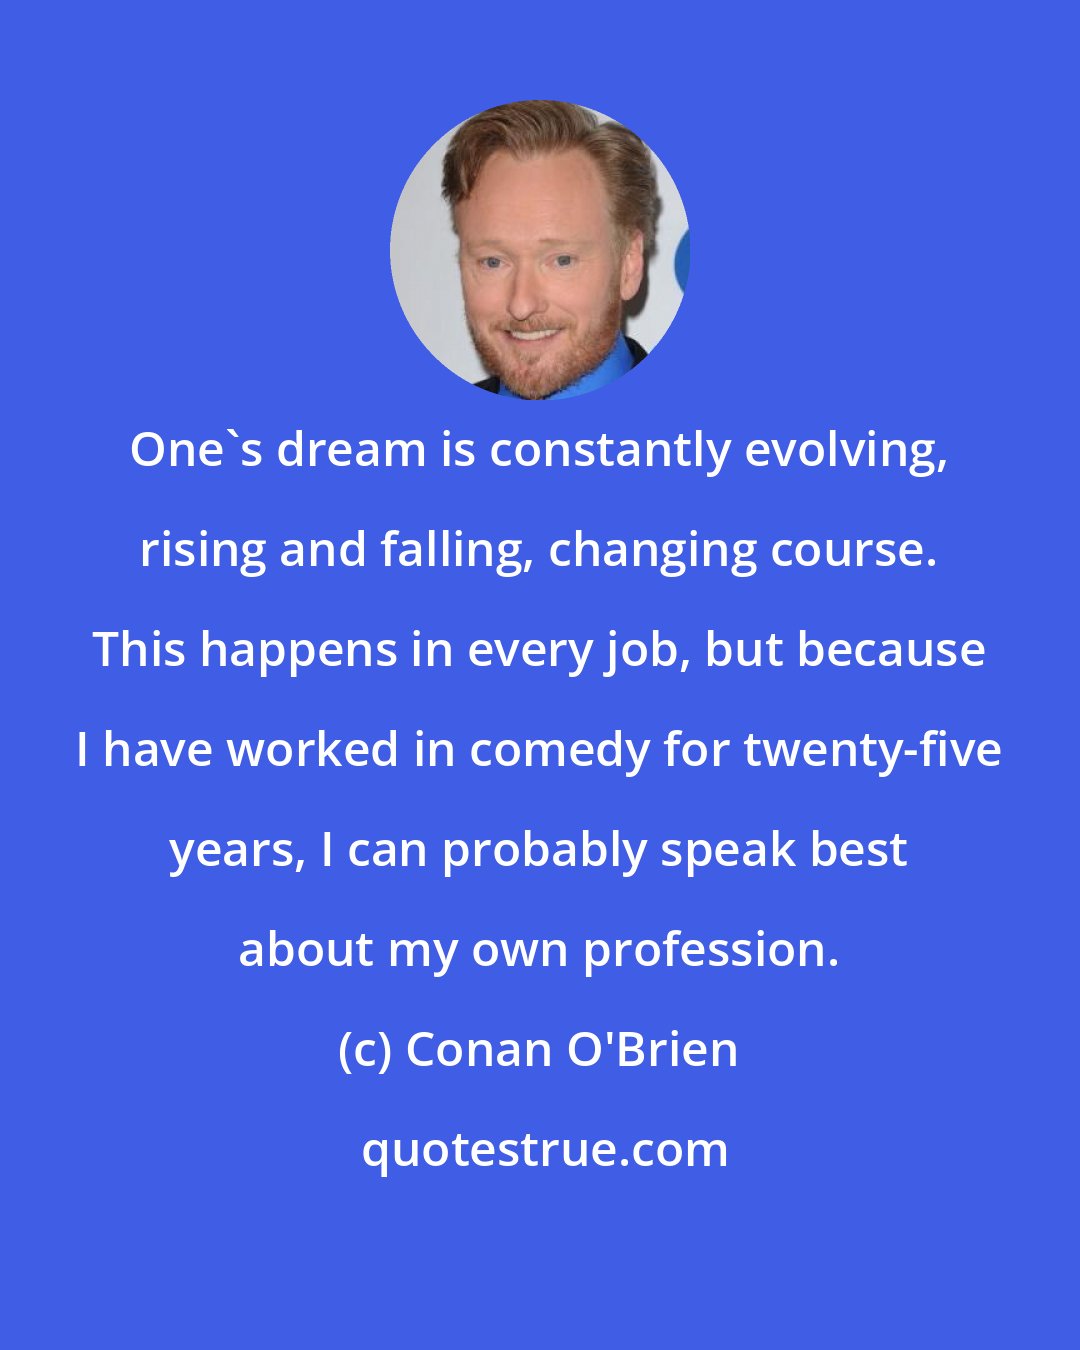 Conan O'Brien: One's dream is constantly evolving, rising and falling, changing course. This happens in every job, but because I have worked in comedy for twenty-five years, I can probably speak best about my own profession.